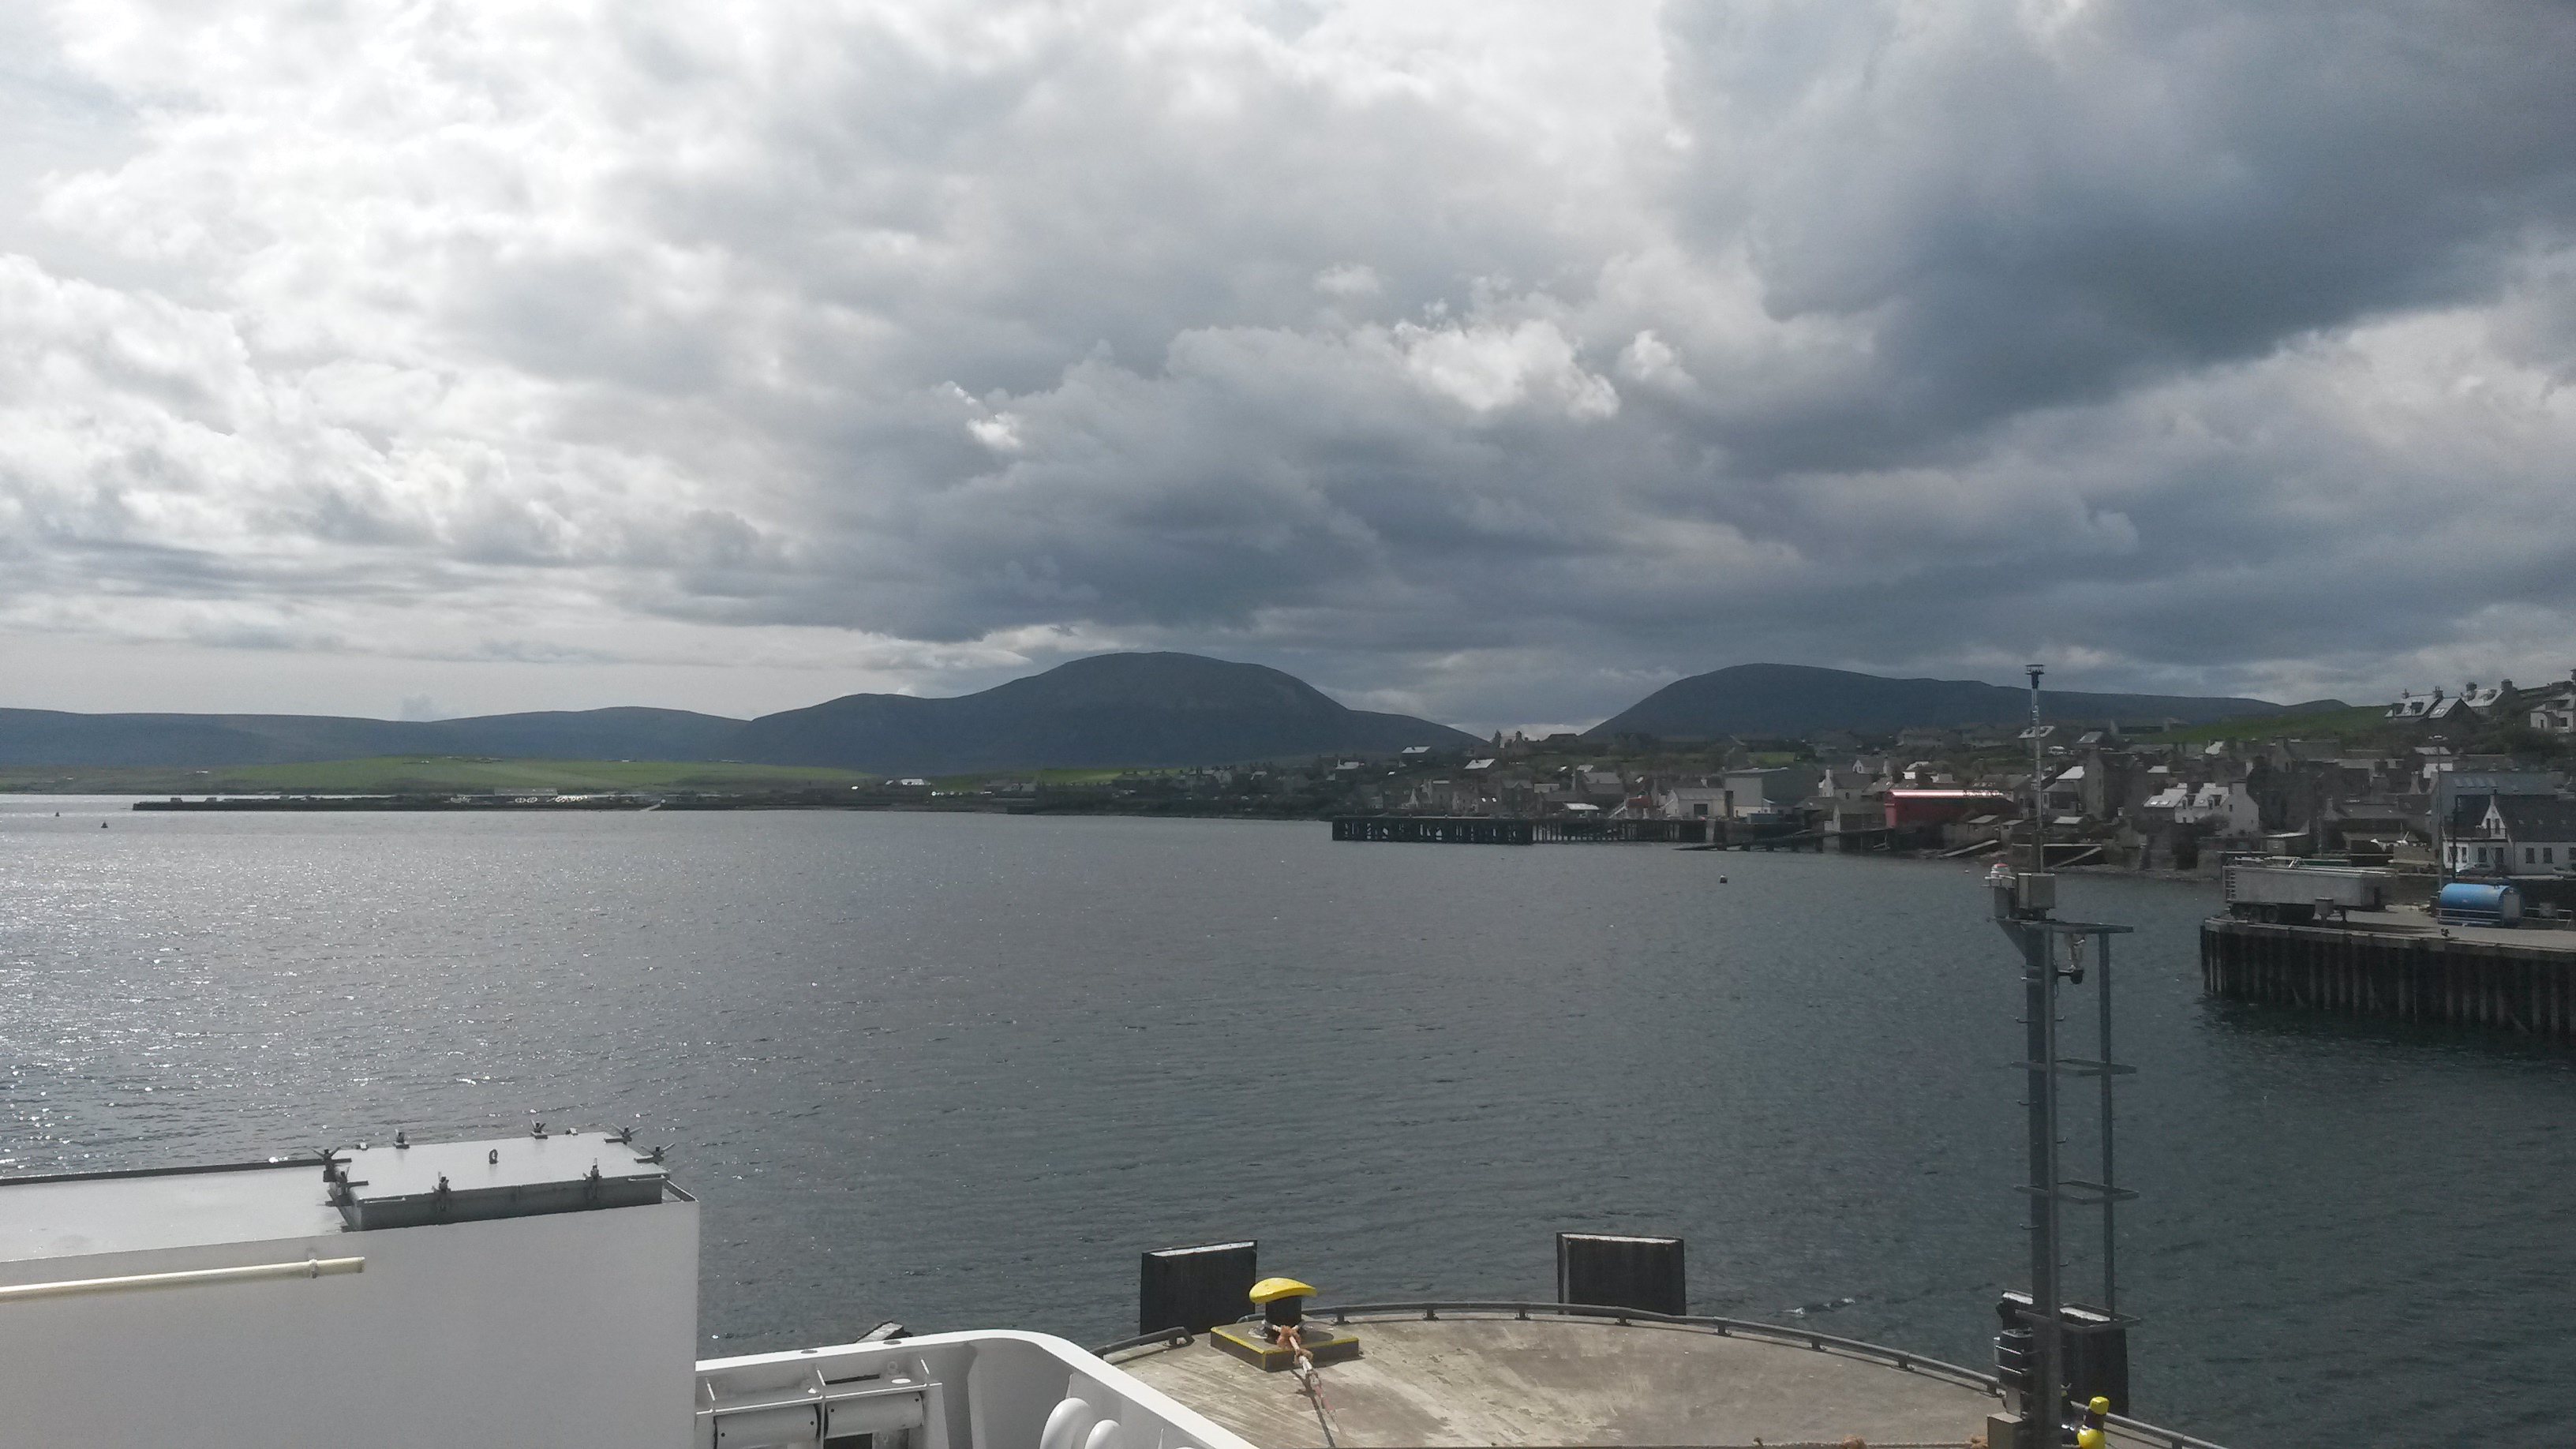 The hills of Hoy viewed from the deck of the Hamnavoe as it was leaving Stromness